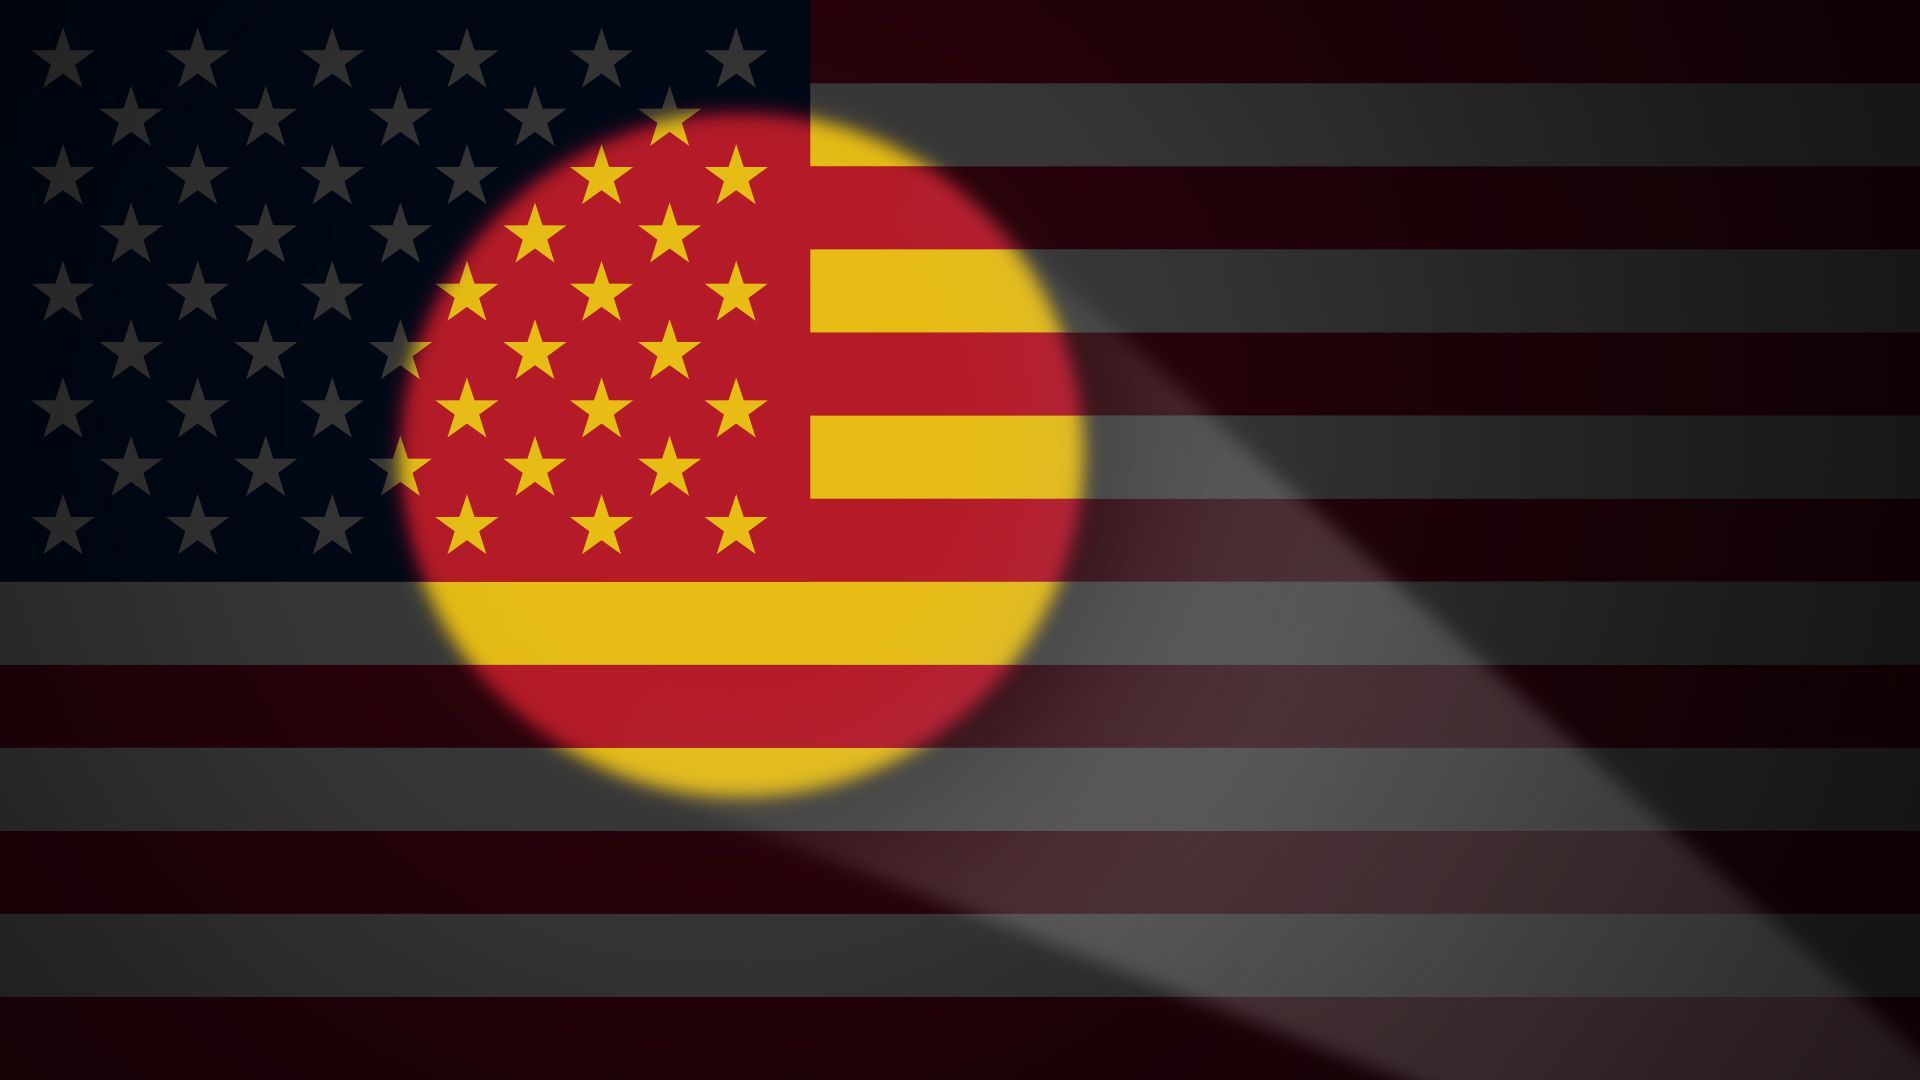 Illustration of an American flag in the dark with a spotlight revealing a section of the American flag made with Chinese flag colors.  